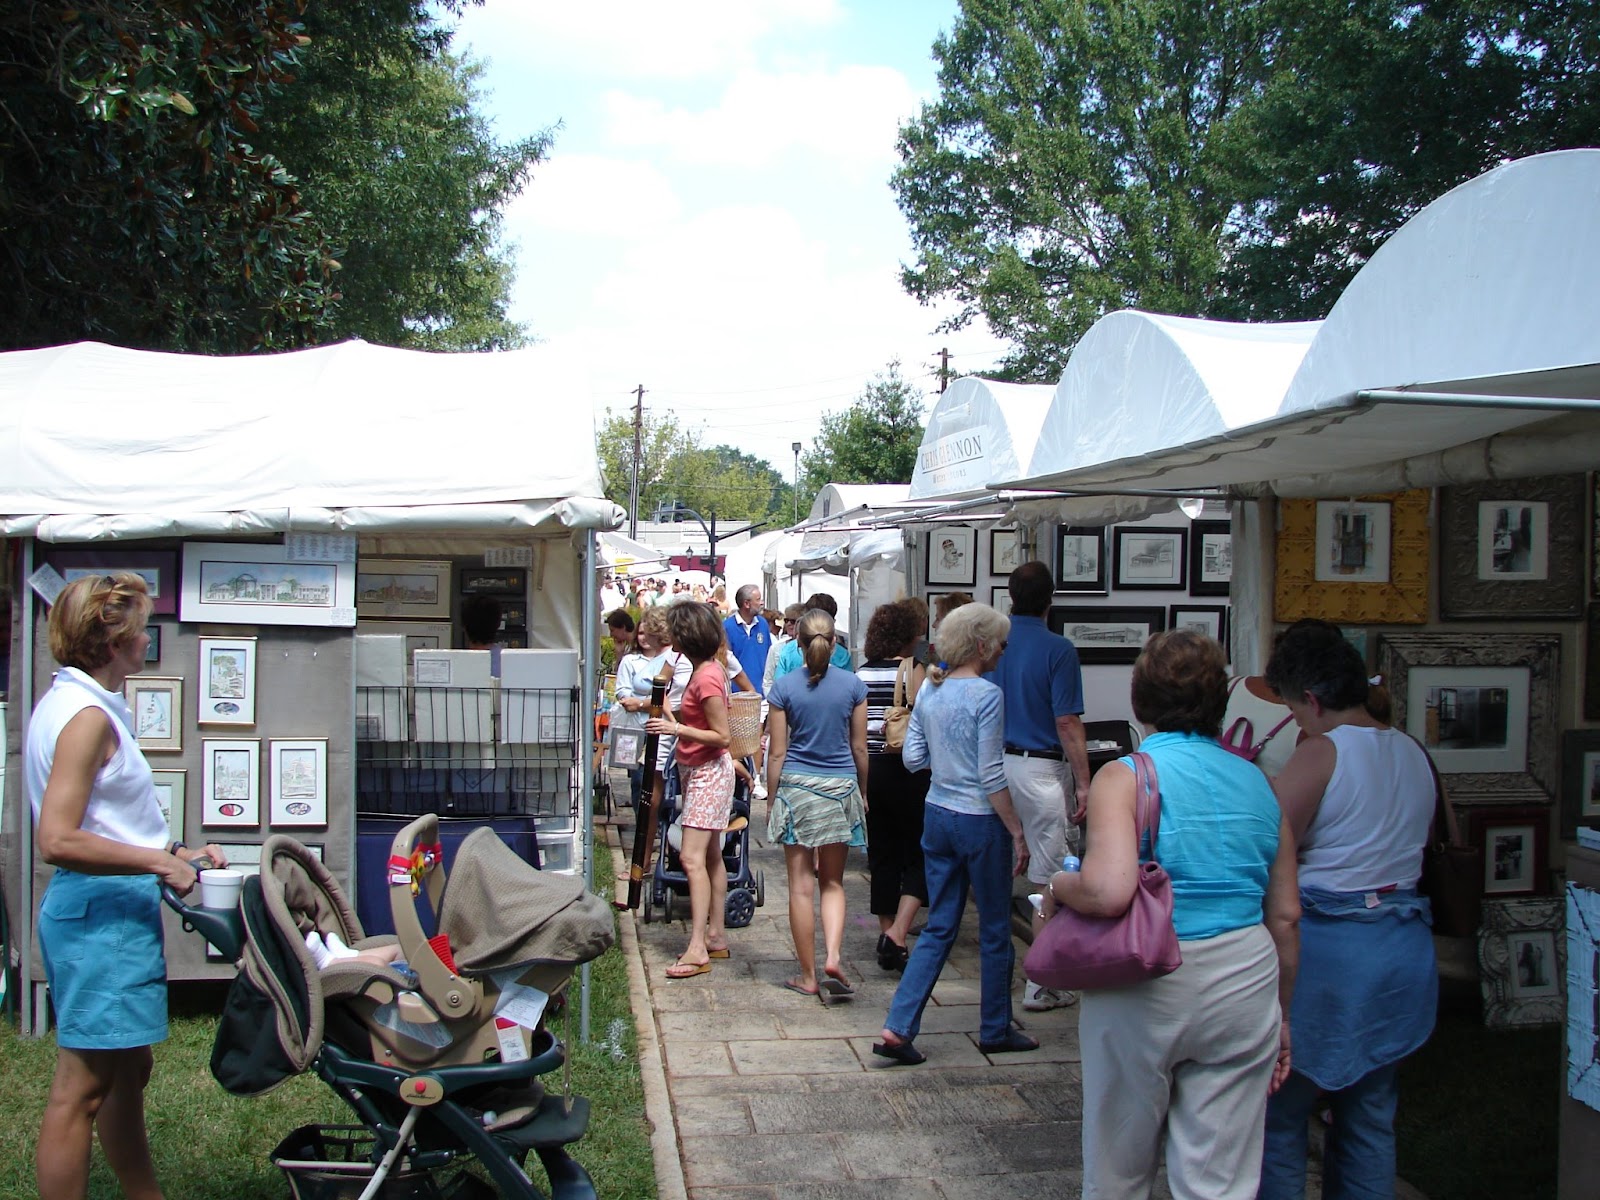 You may view local and regional art during the Roswell Arts Festival.